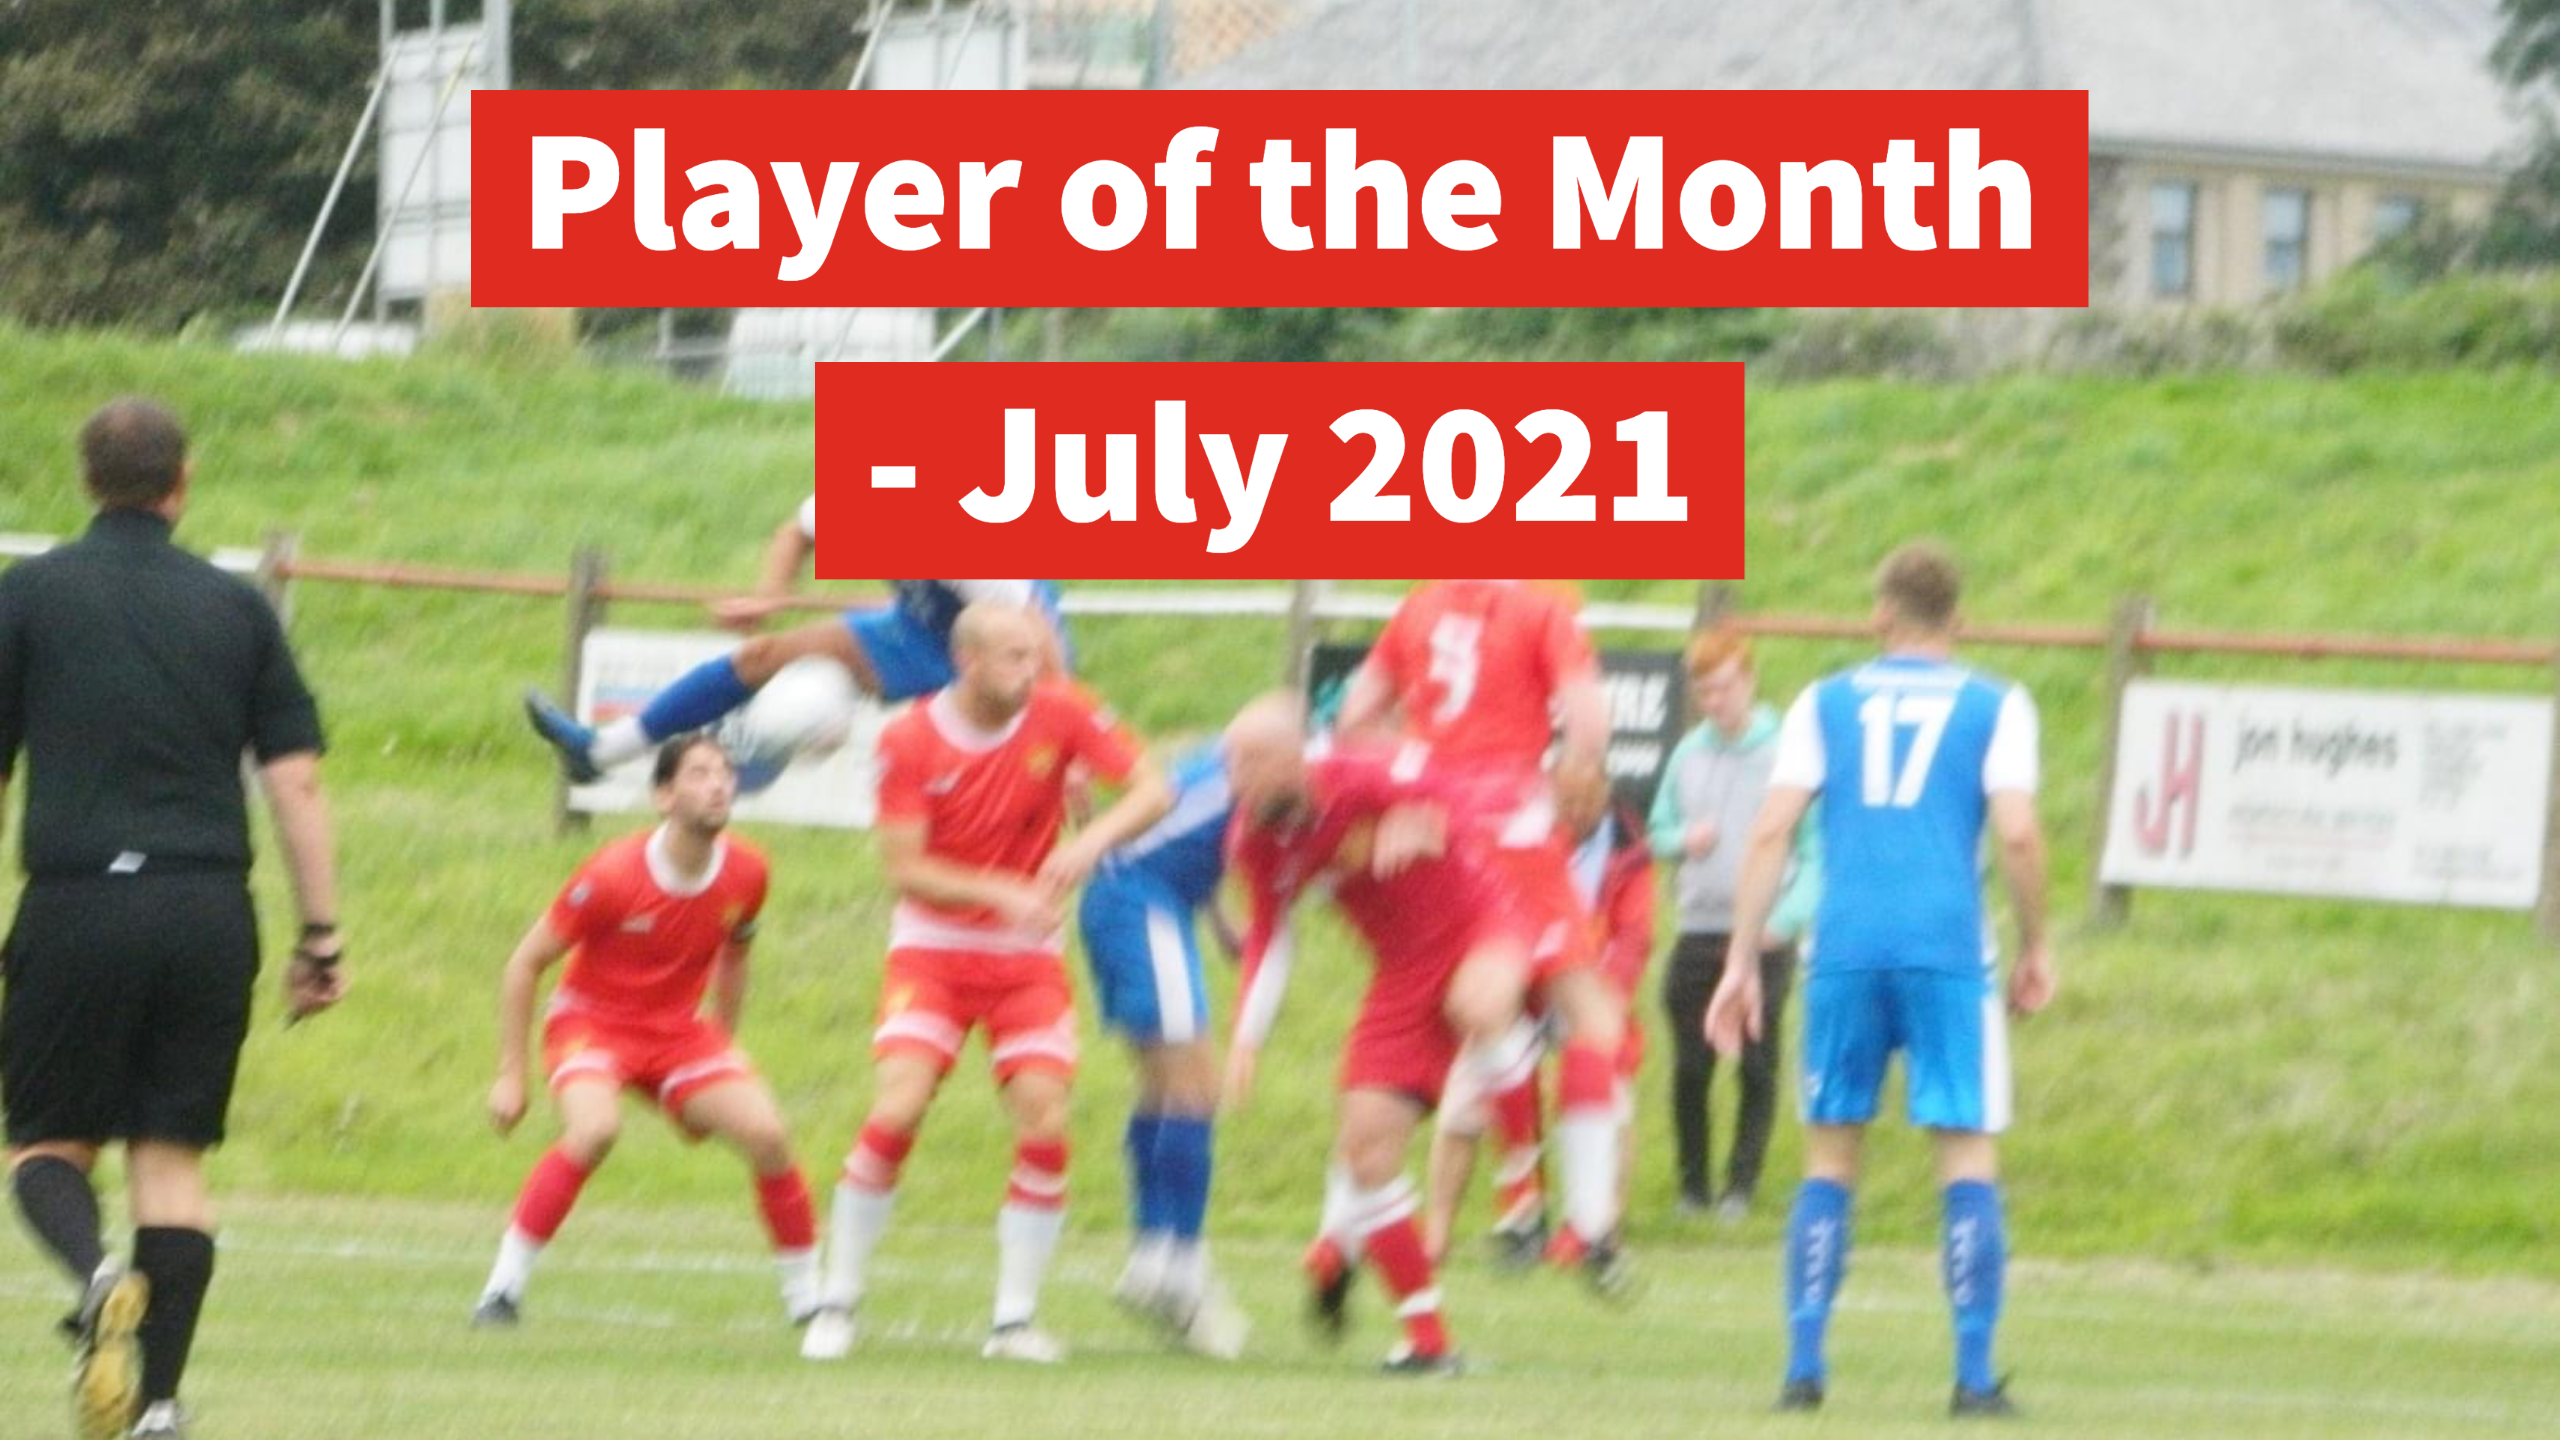 Player of the Month - July 2021